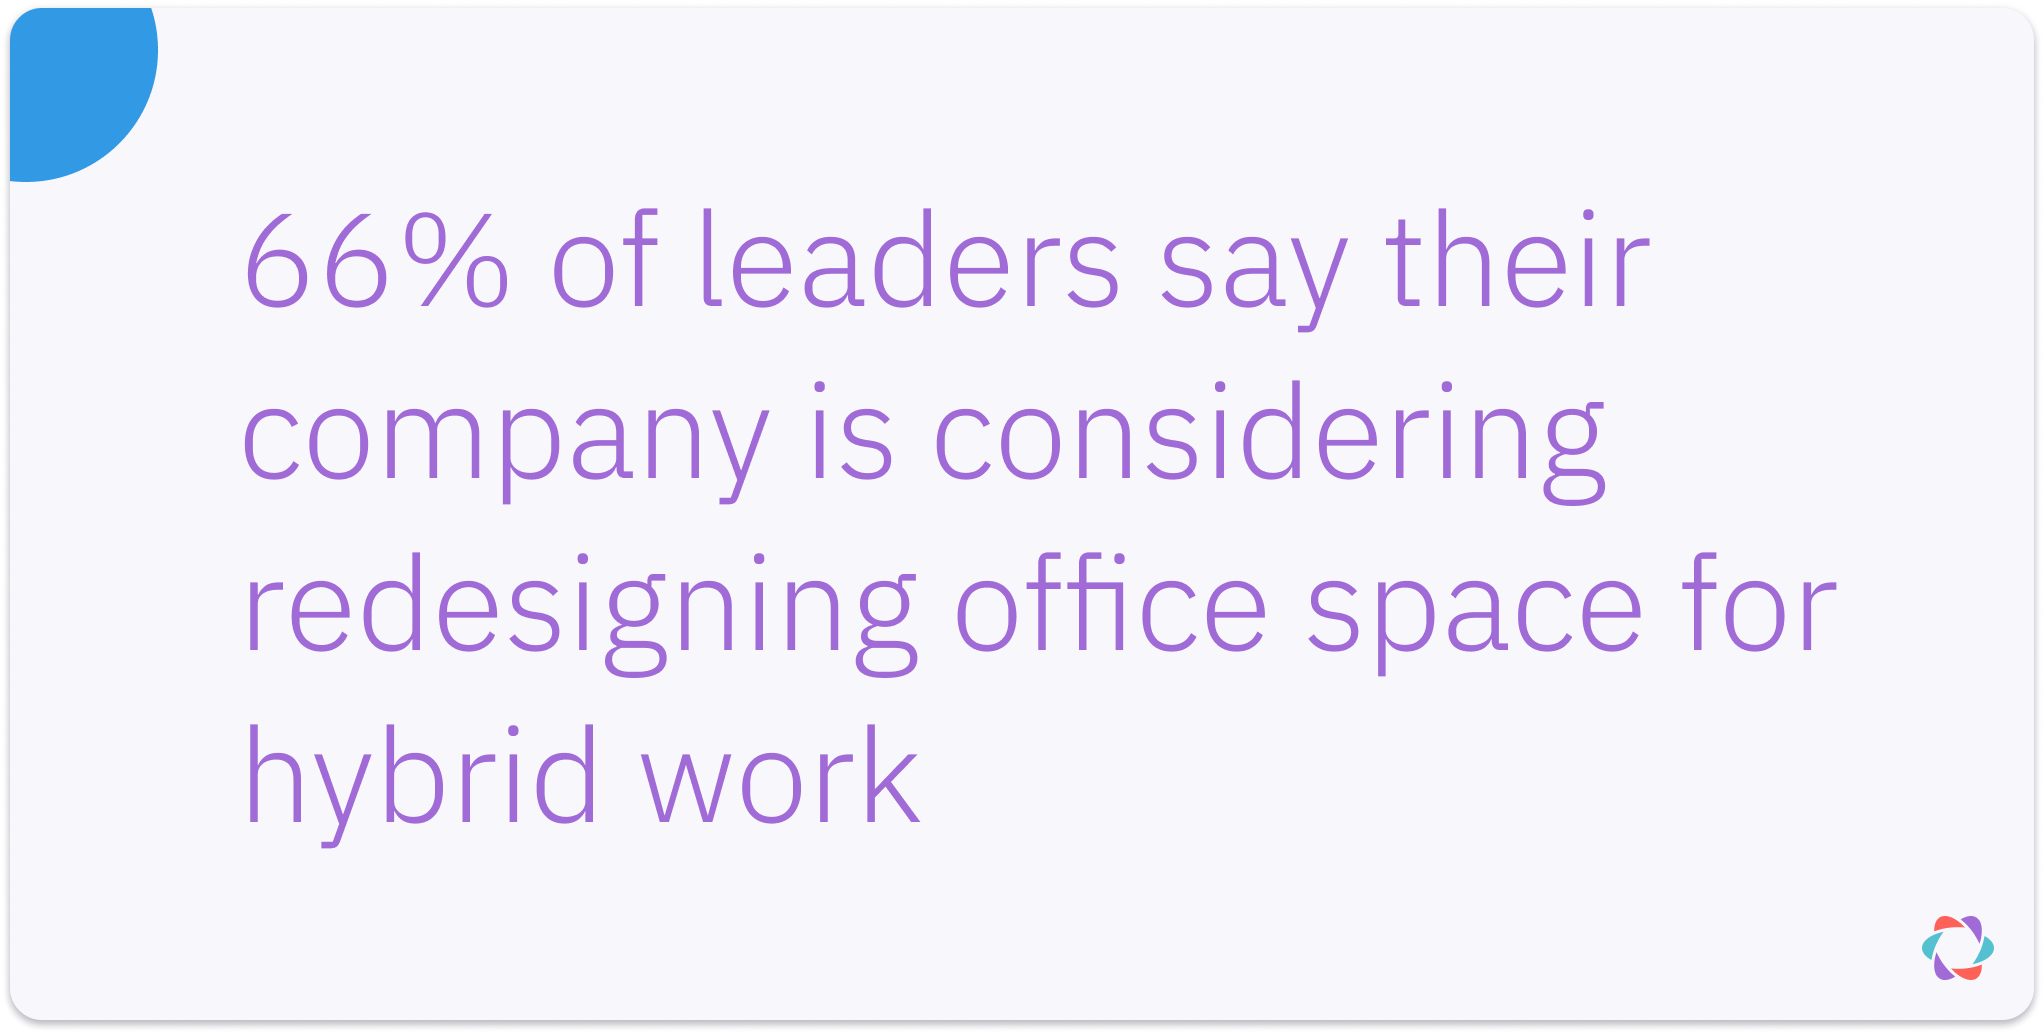 Most leaders plan to redesign their office spaces for hybrid work.